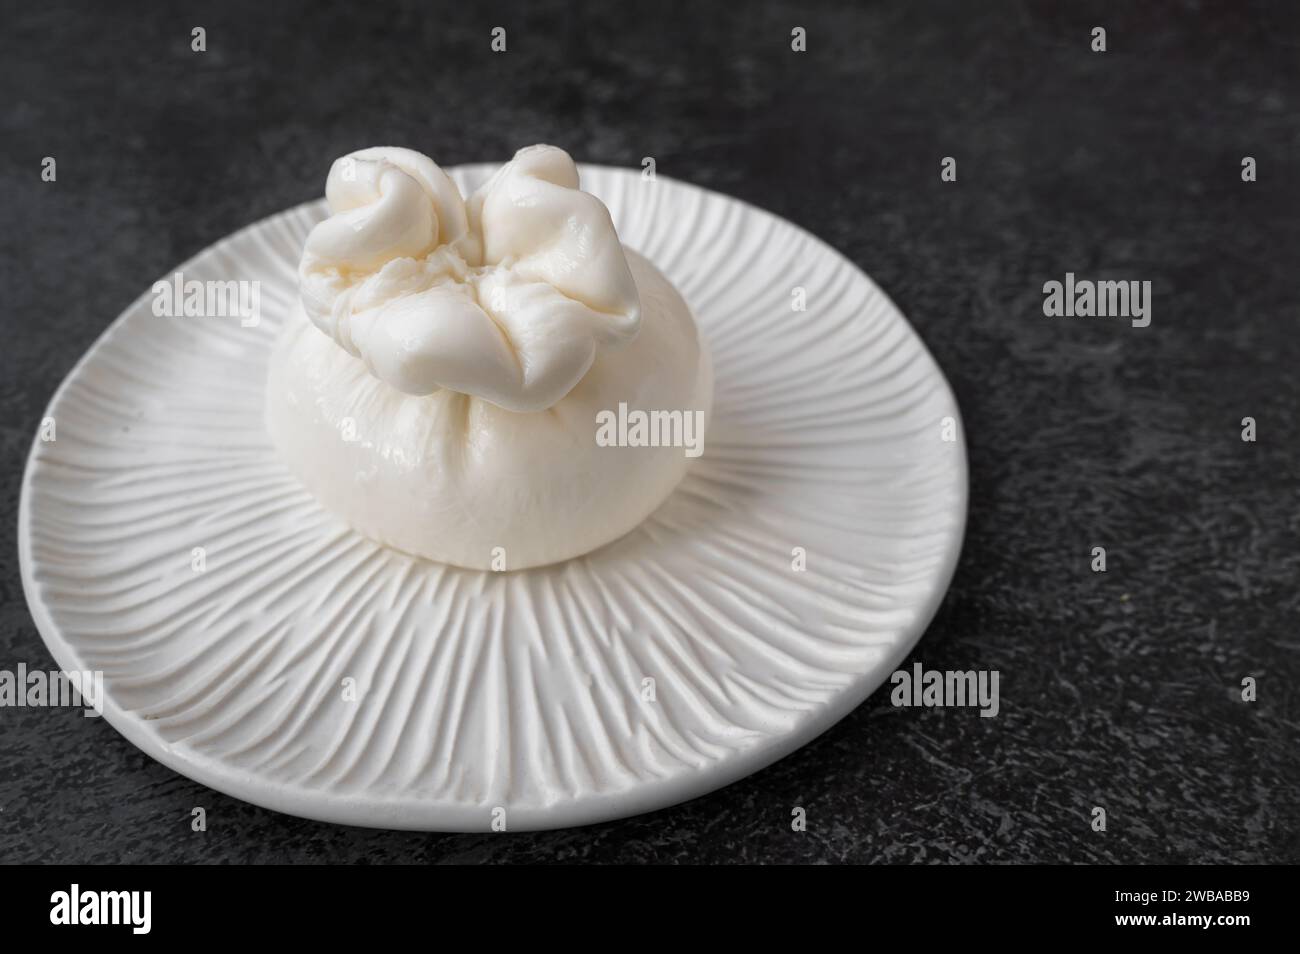 burrata on a beautiful handmade white plate. The dish is set against a dark background, copy space. Stock Photo